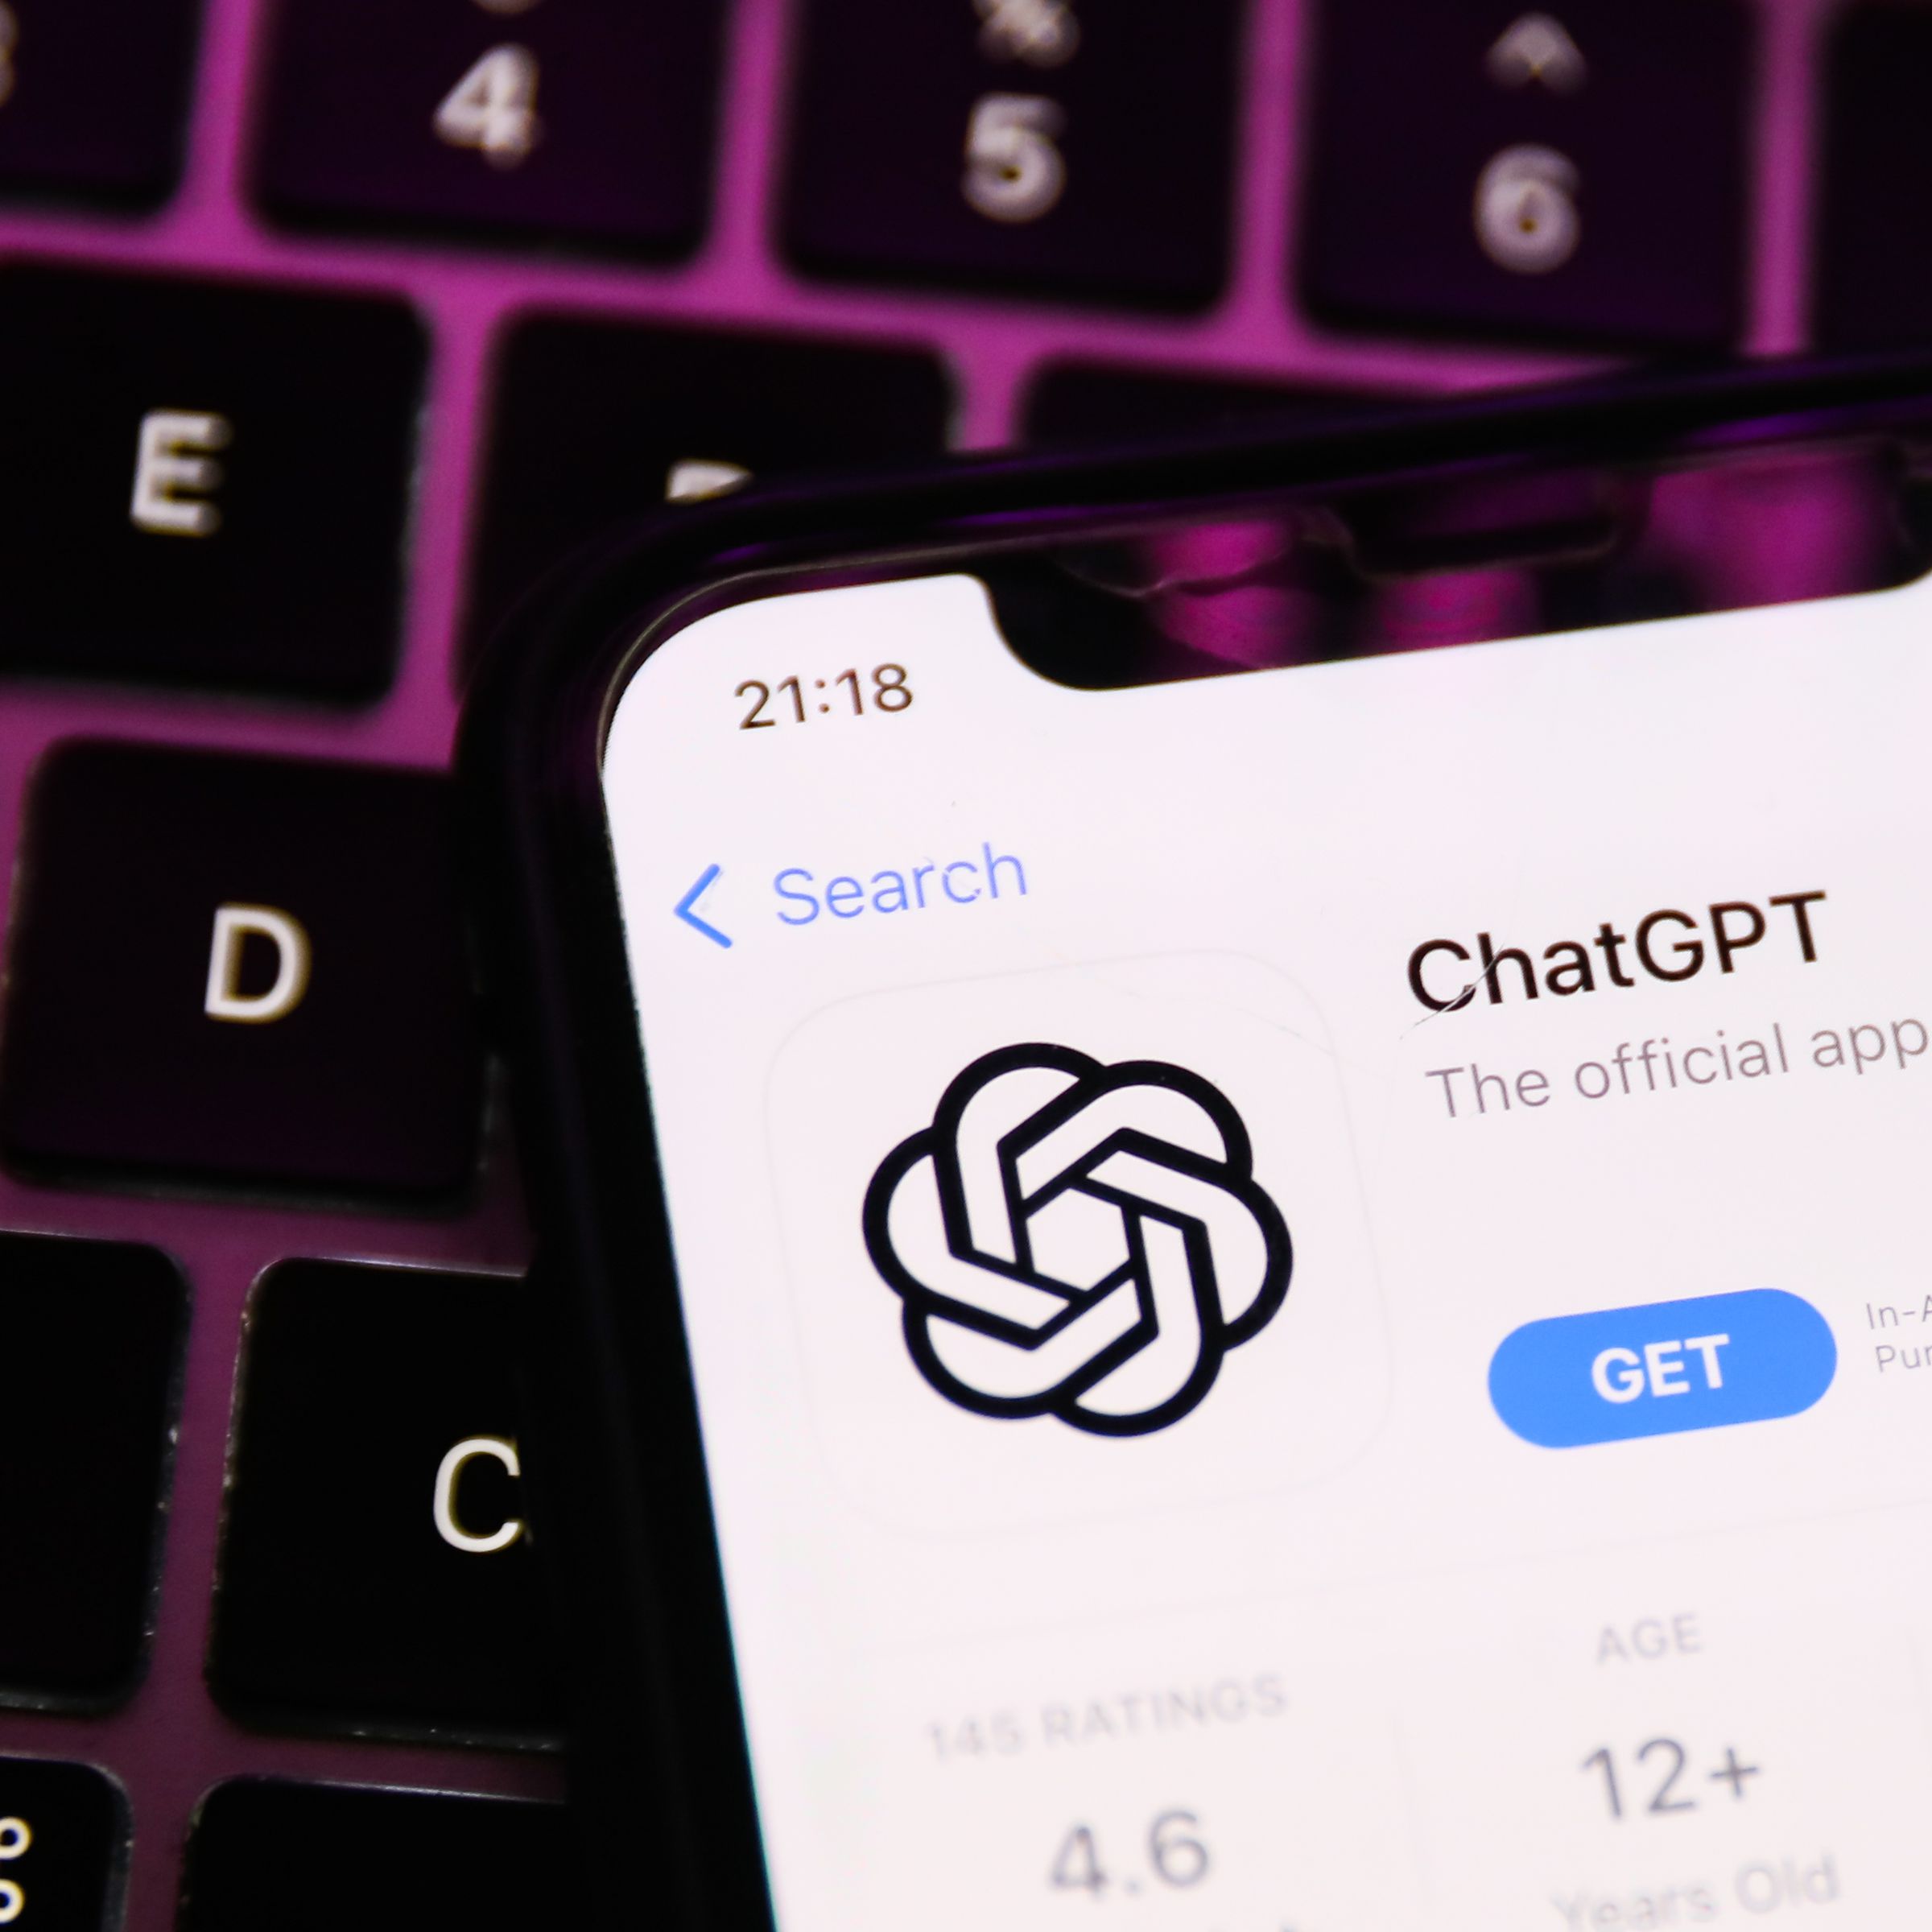 ChatGPT Official App Photo Illustrations